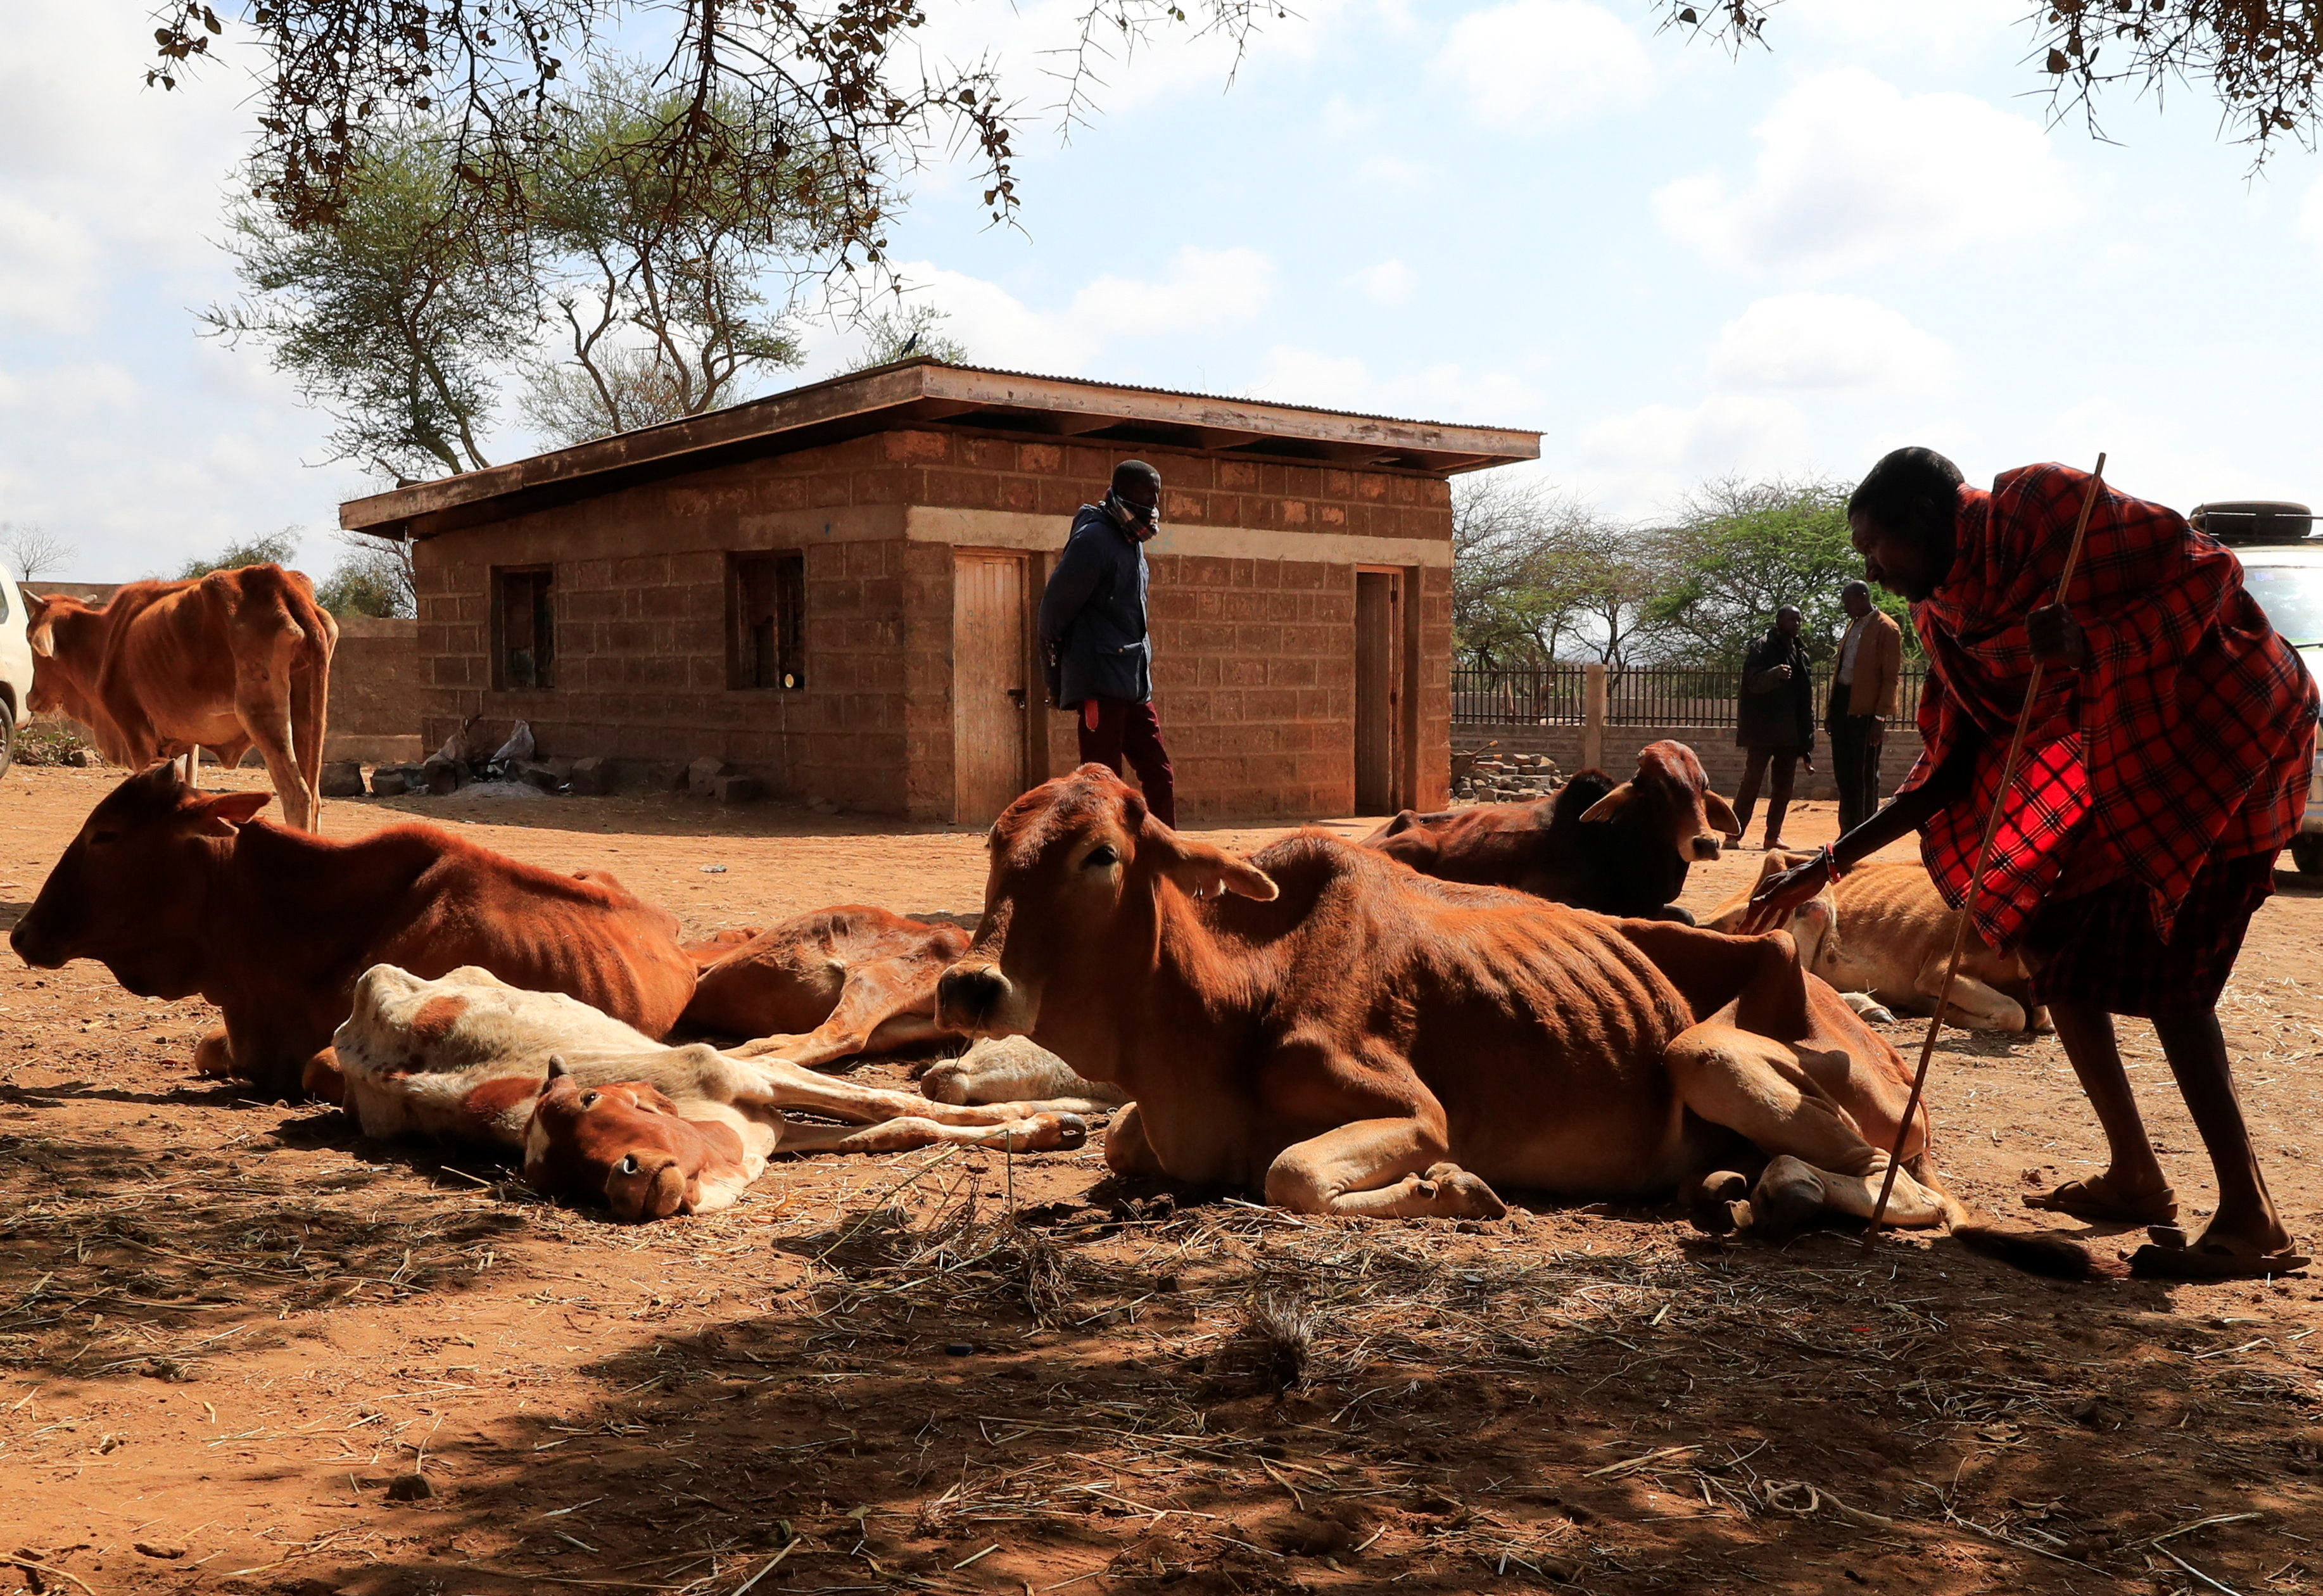 Drought in Kenya forces Maasai herders to sell emaciated cattle in Kajiado